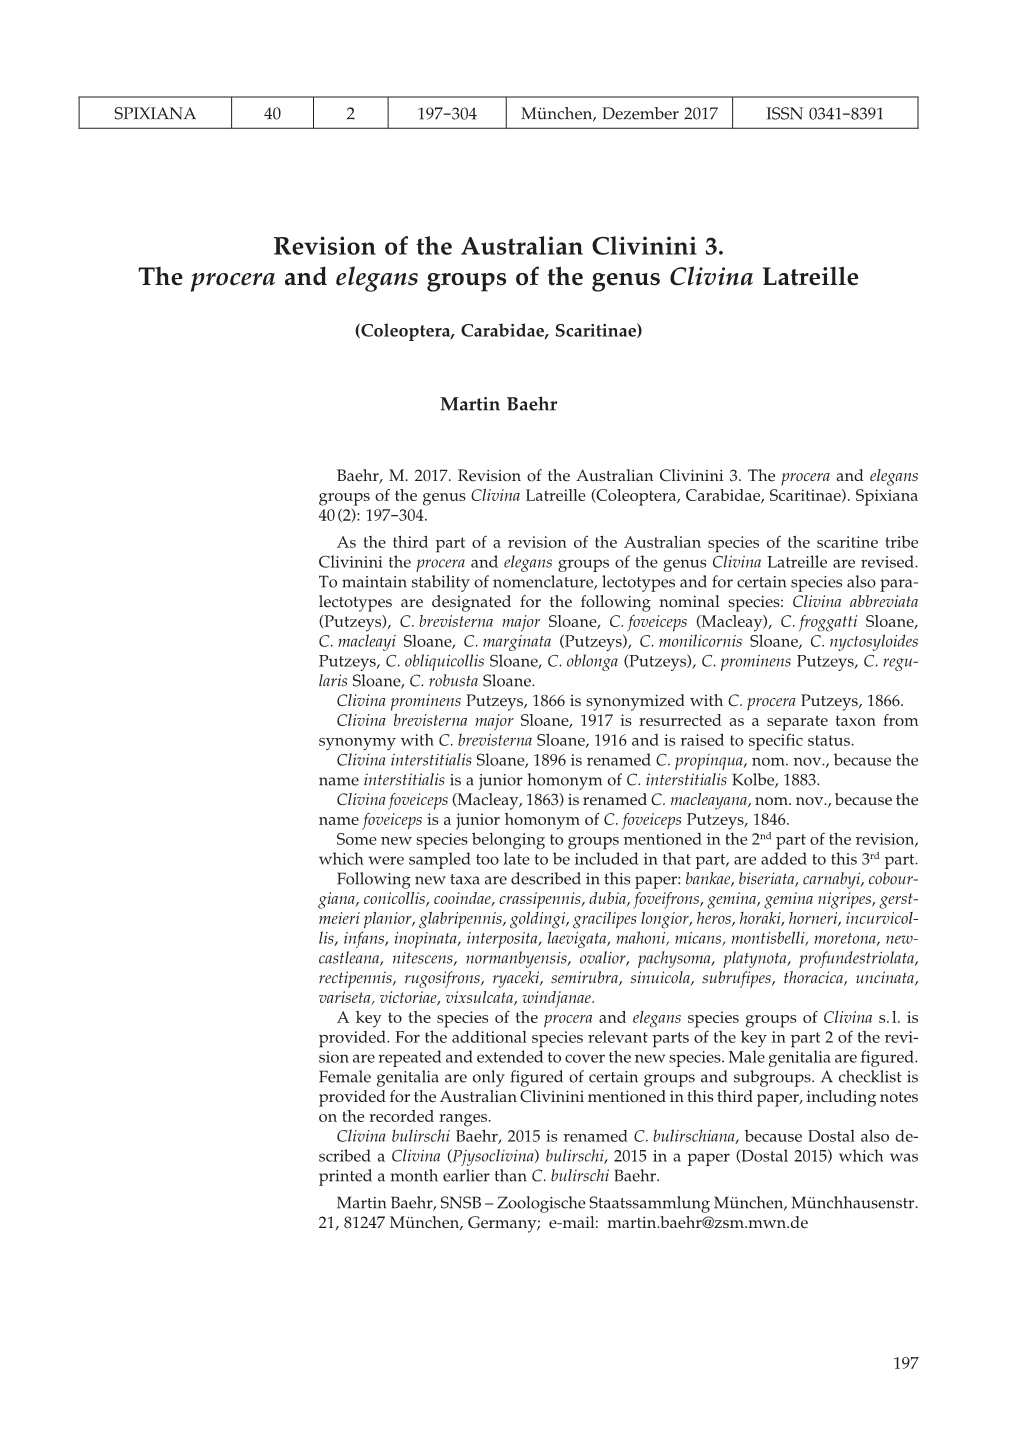 Revision of the Australian Clivinini 3. the Procera and Elegans Groups of the Genus Clivina Latreille